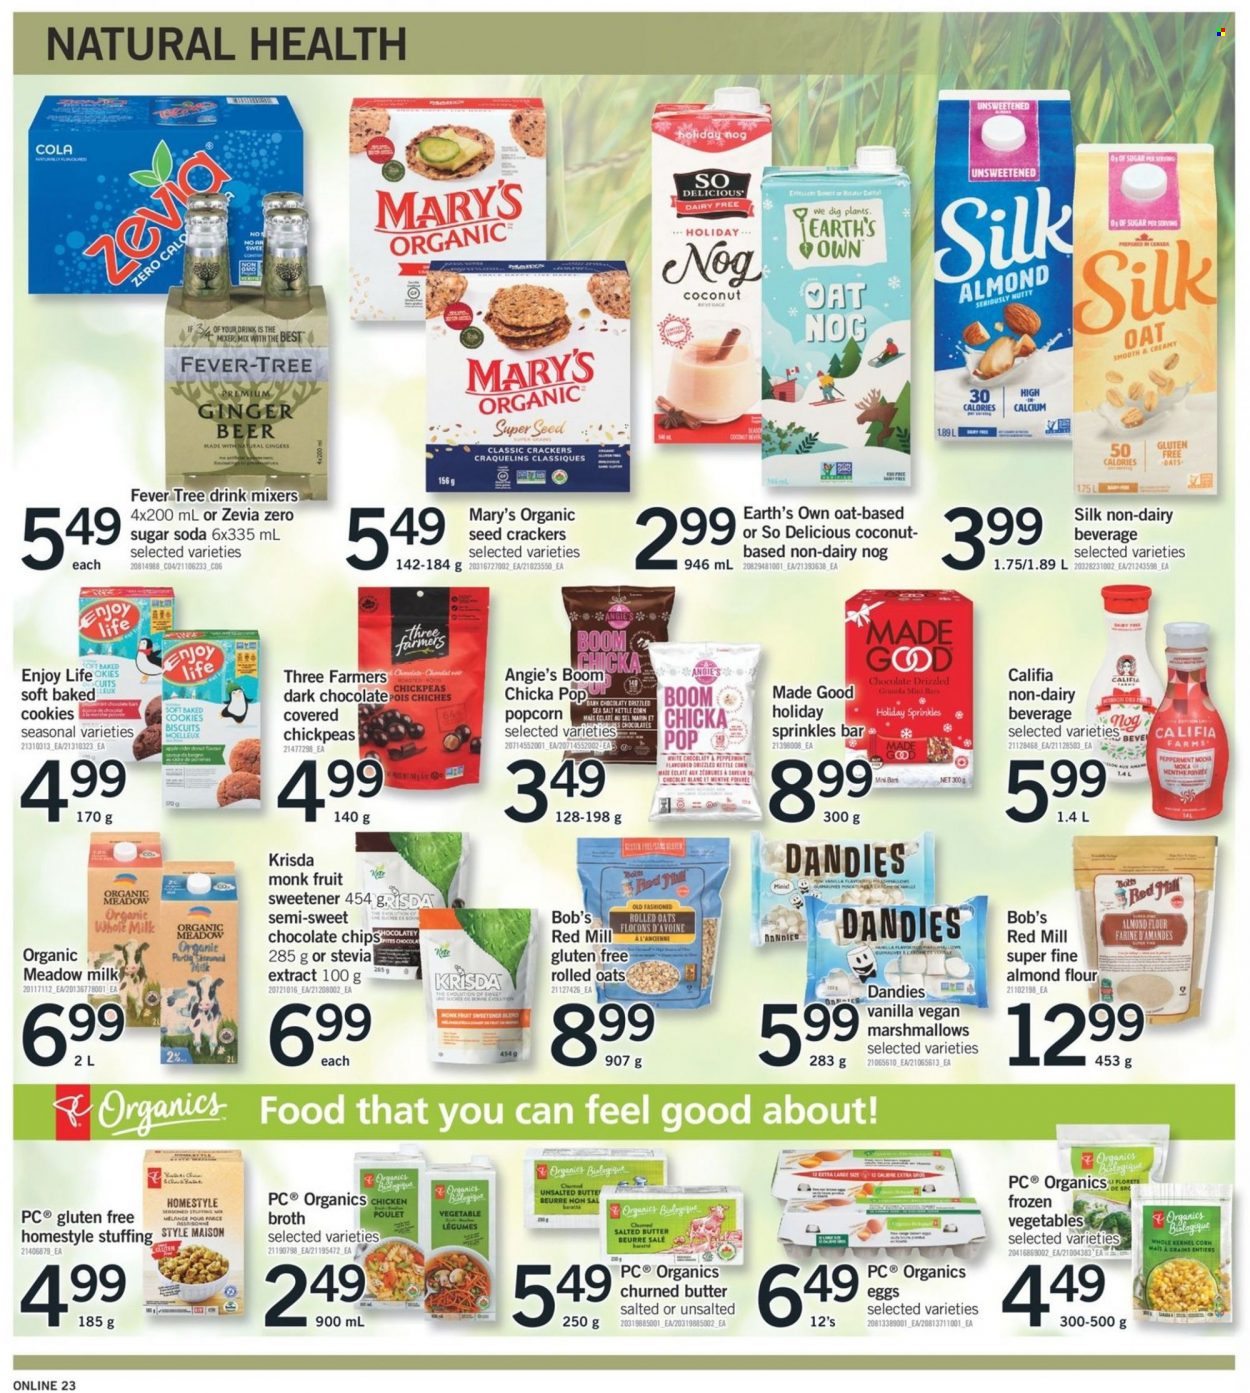 thumbnail - Fortinos Flyer - December 01, 2022 - December 07, 2022 - Sales products - donut, coconut, milk, Silk, eggs, salted butter, frozen vegetables, cookies, marshmallows, crackers, biscuit, dark chocolate, chocolate bar, kettle corn, popcorn, flour, stuffing mix, chicken broth, oats, broth, almond flour, stevia, sweetener, rolled oats, chickpeas, apple cider, cider, beer, Brut, mixer, plant seeds, calcium, ginger beer. Page 20.